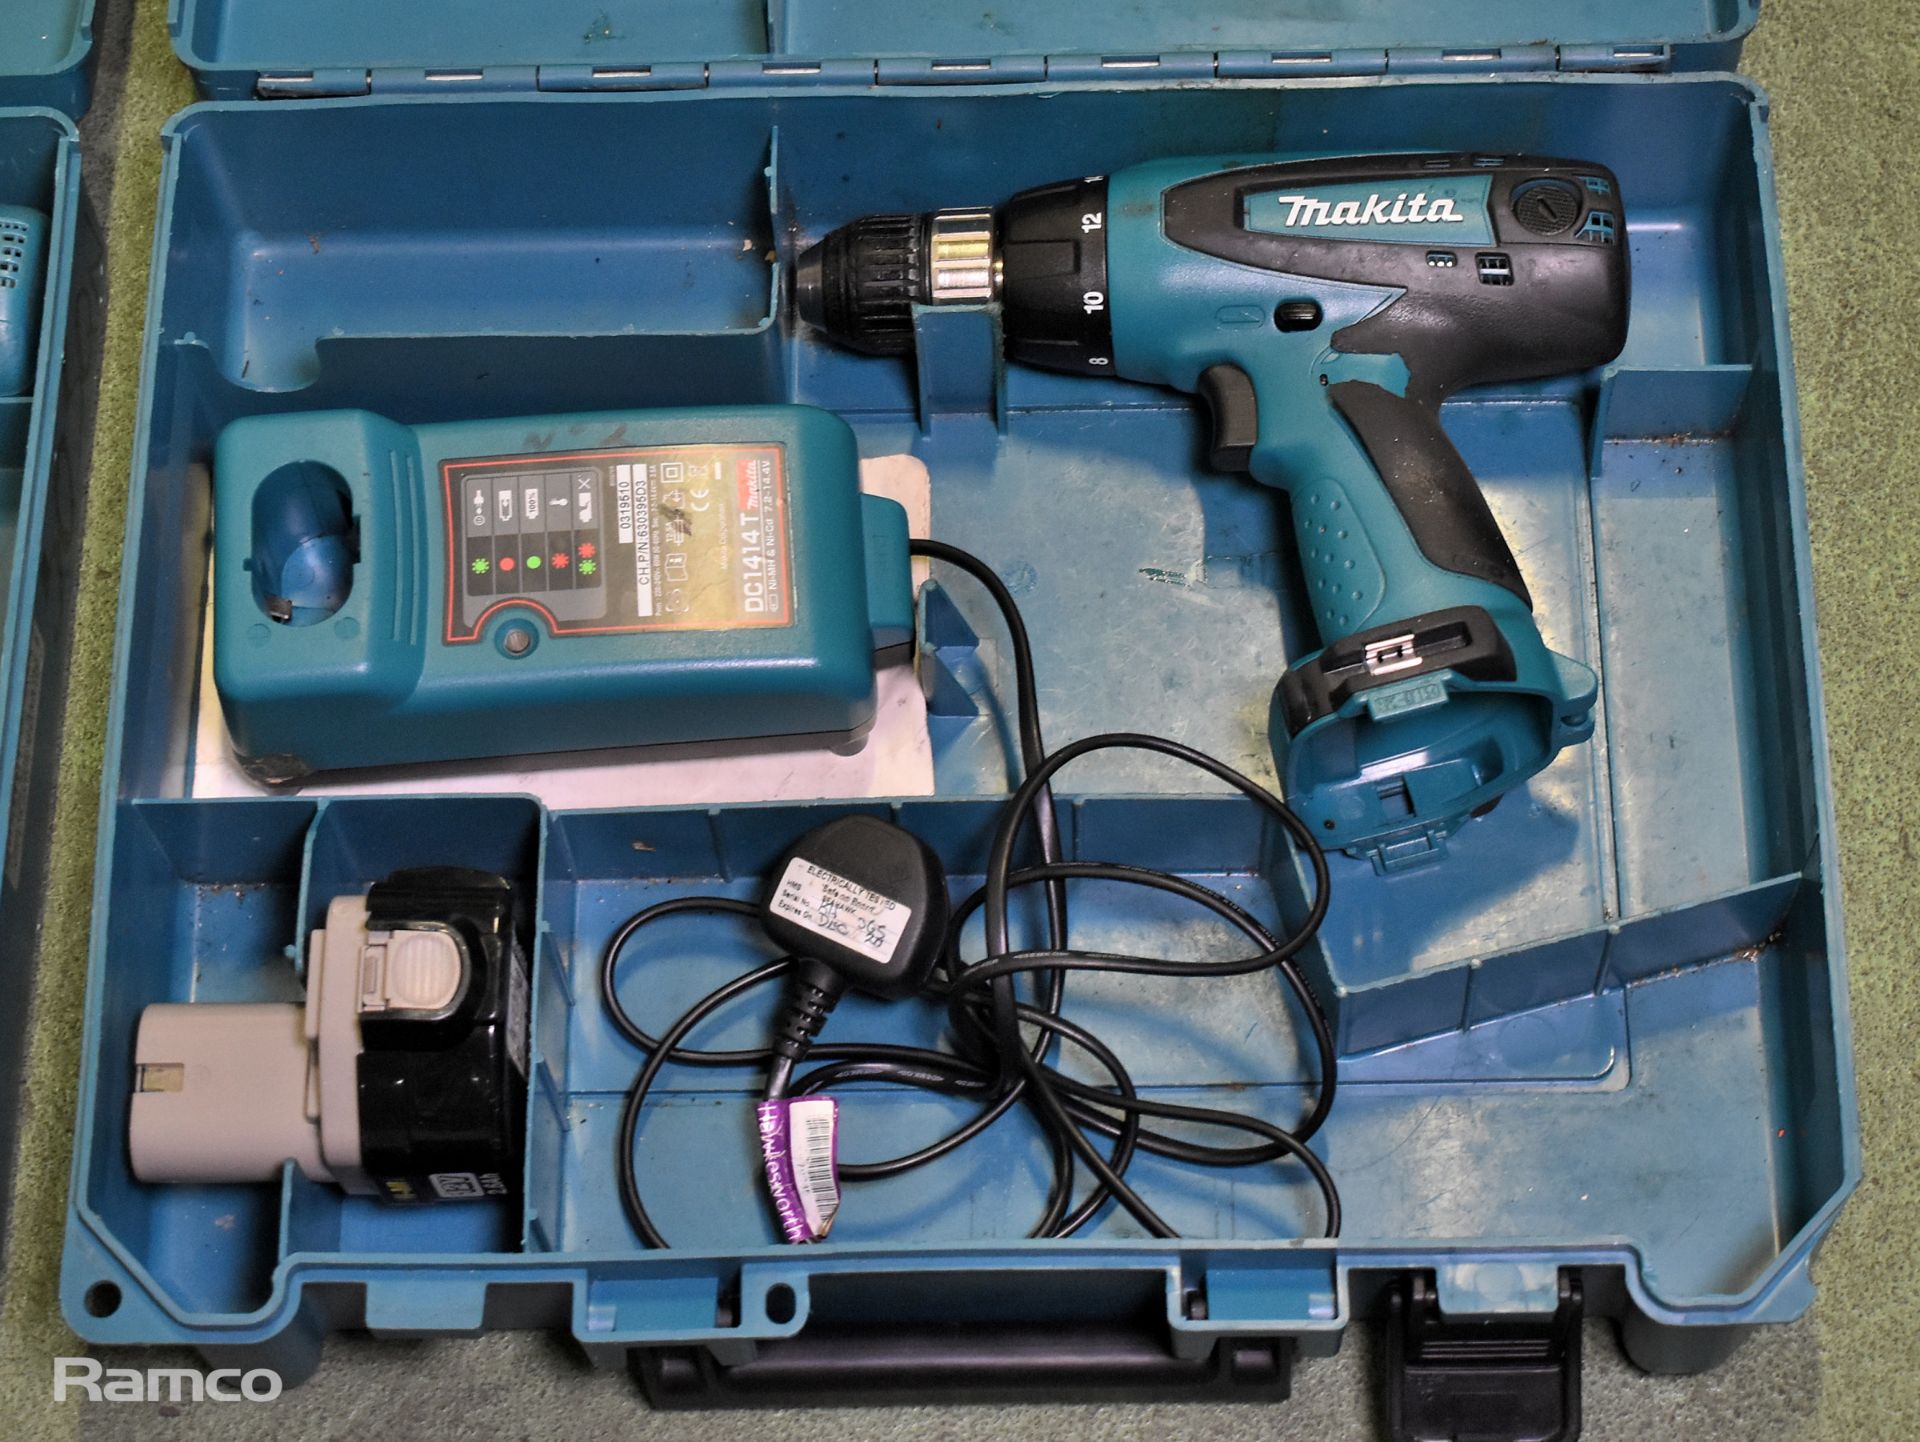 2x Makita 6317D cordless drills - DC1414T charger - 1x 12V battery - case - Image 5 of 8